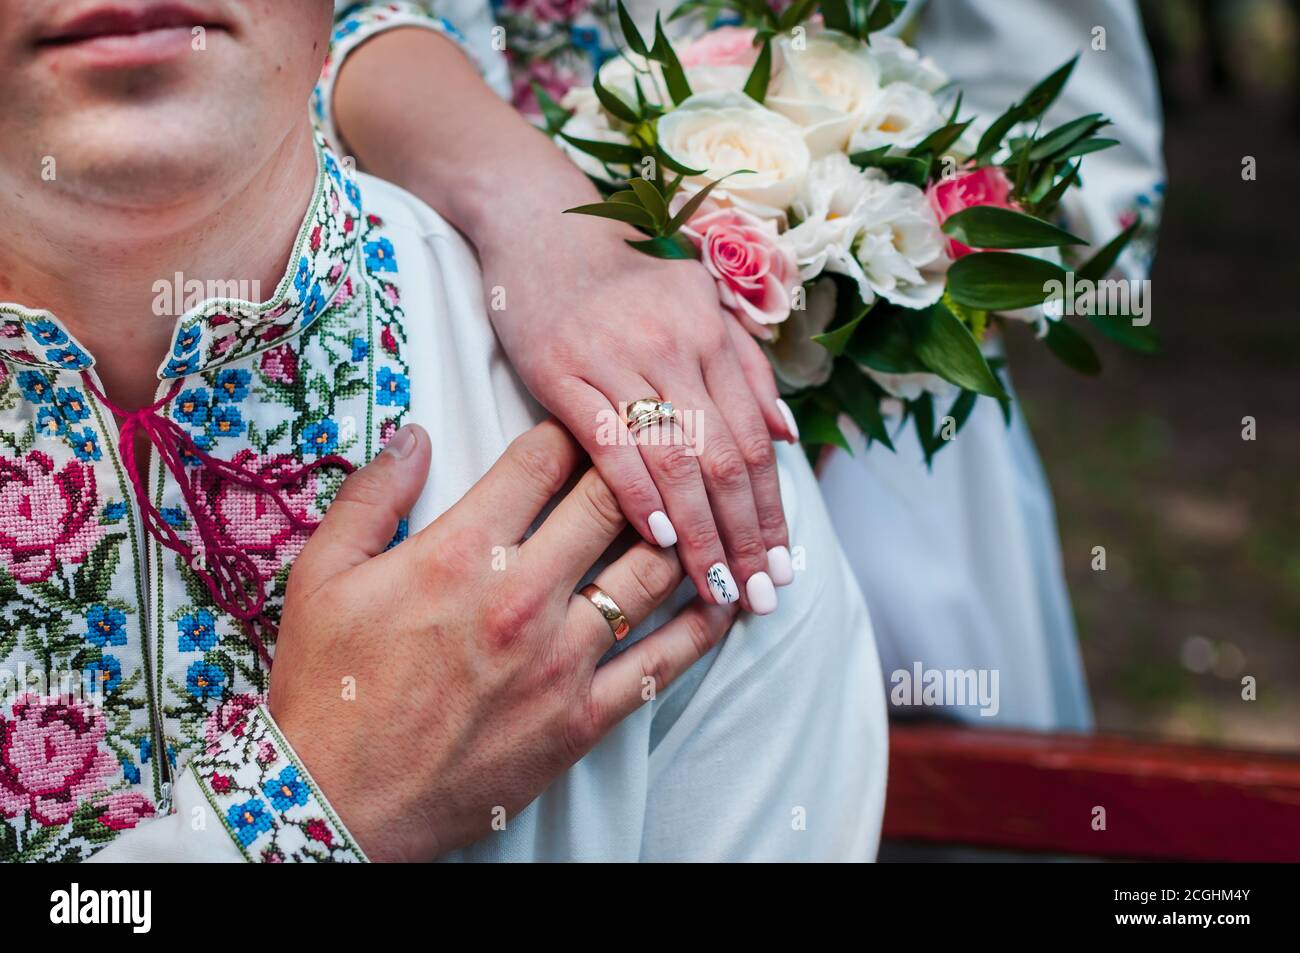 hands of newlyweds with wedding rings on a wedding bouquet with white and pink roses Stock Photo